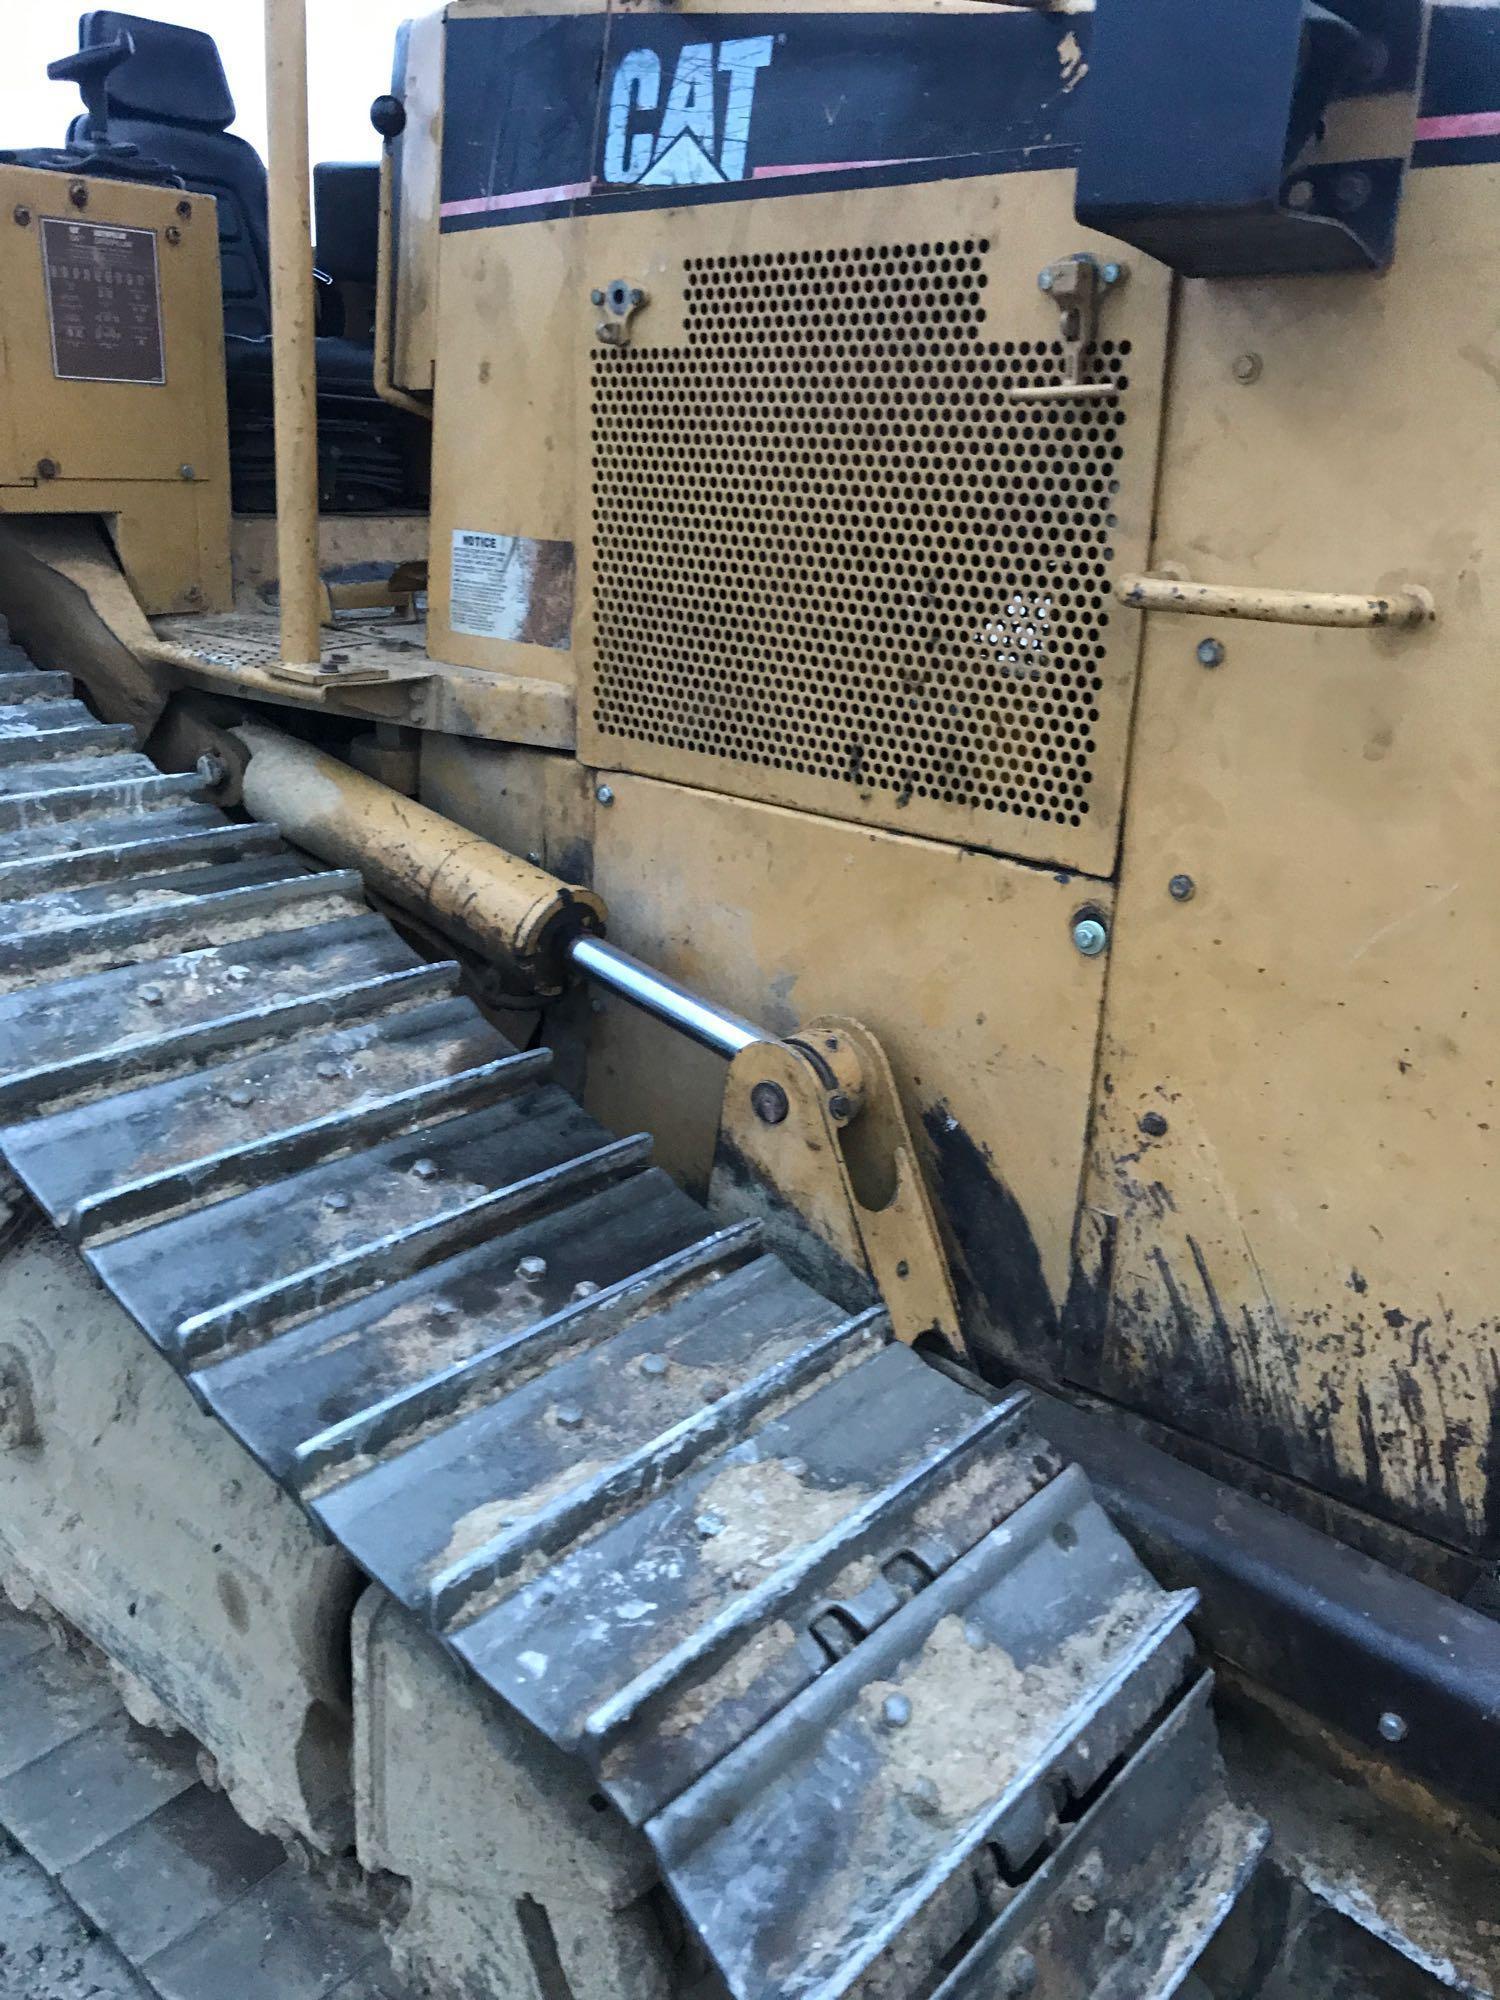 1628- 2000 Cat D5MXL Dozer, with 8036 hours and rebuilt engine